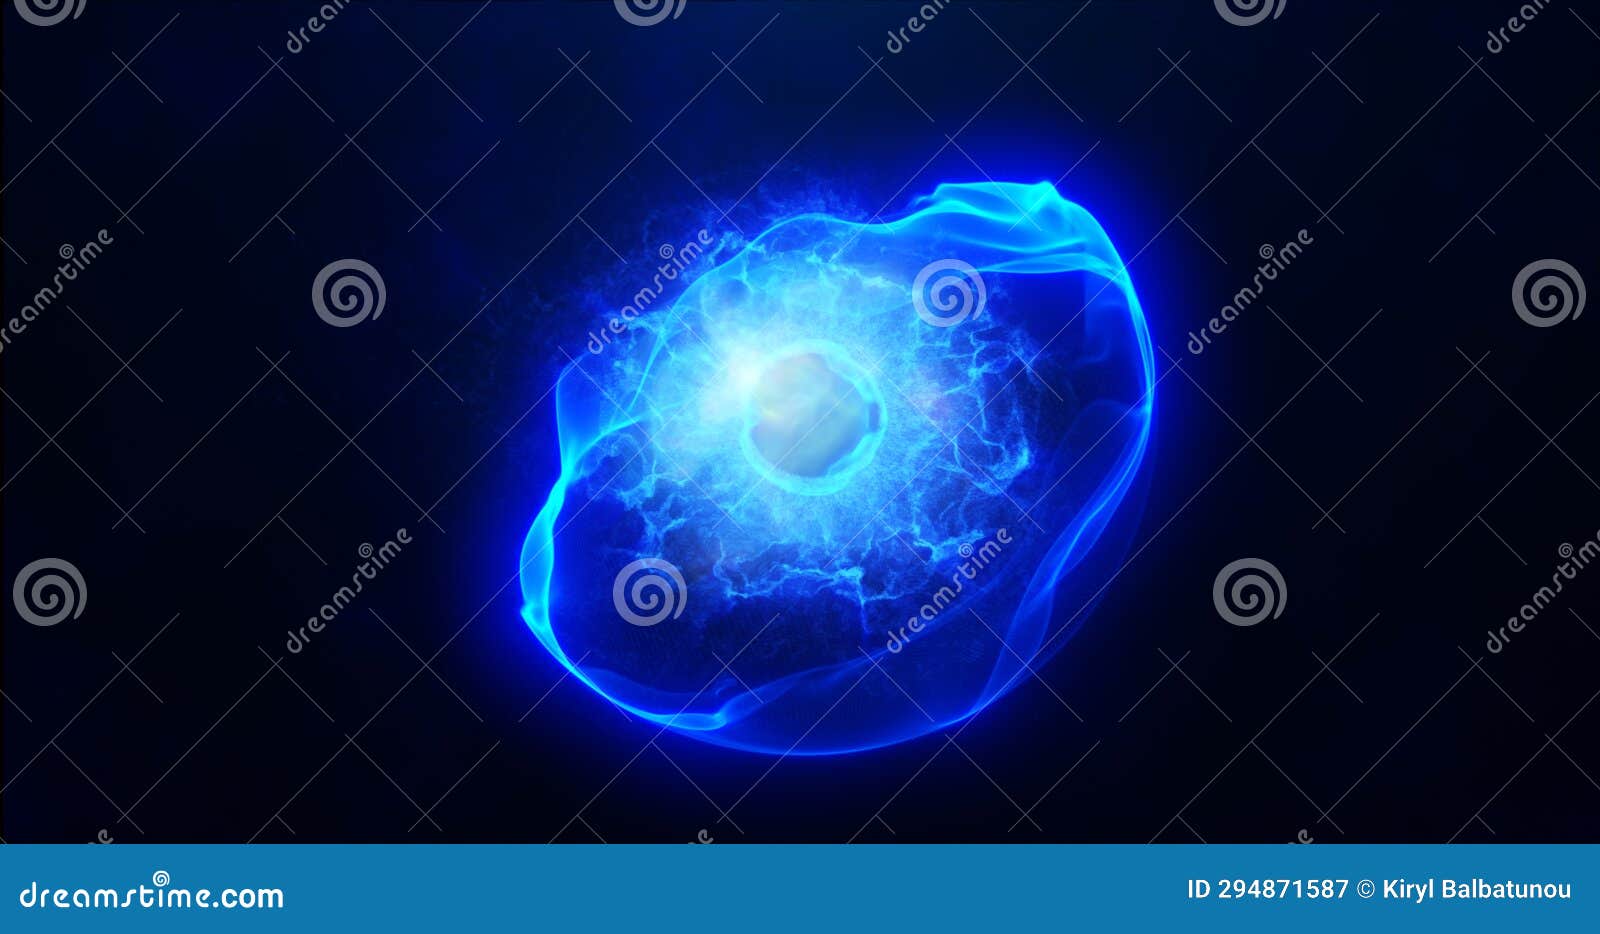 blue energy sphere with glowing bright particles, atom with electrons and elektric